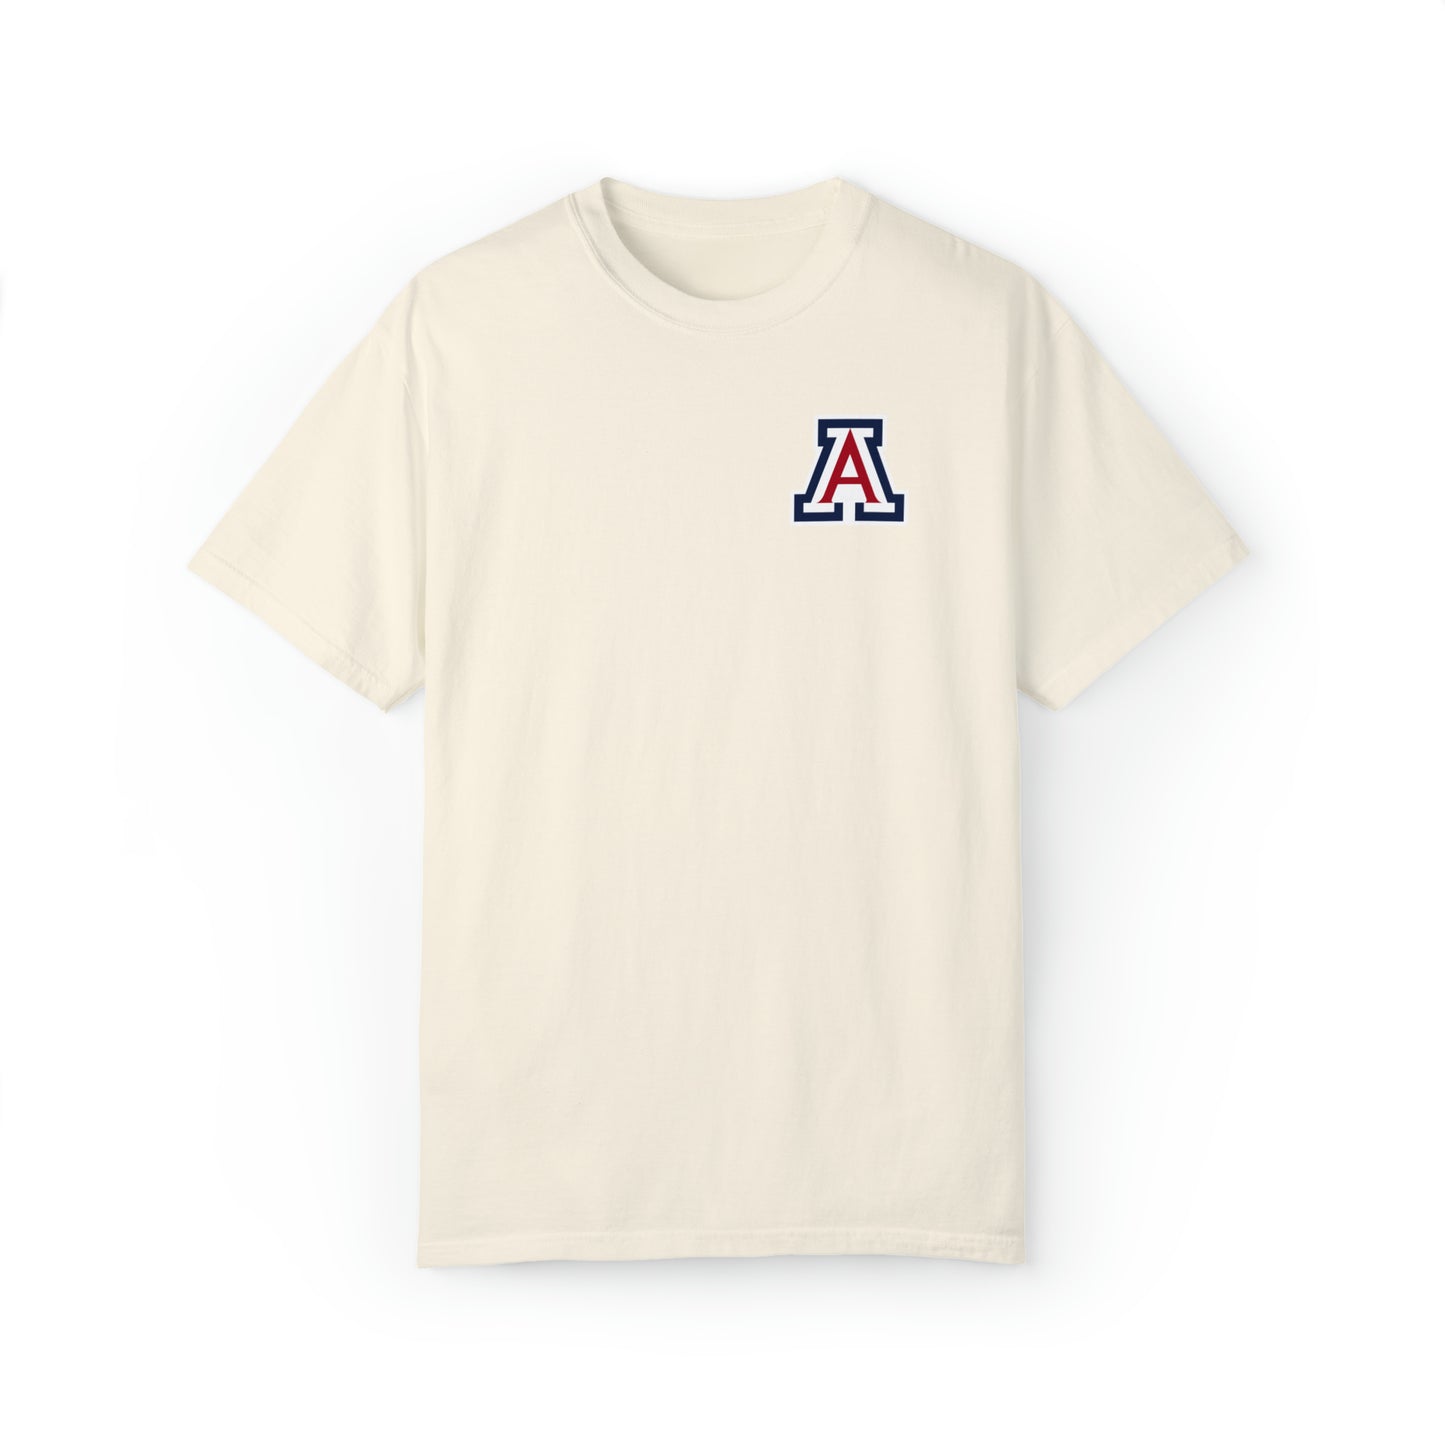 Wildcats Game Day Shirt